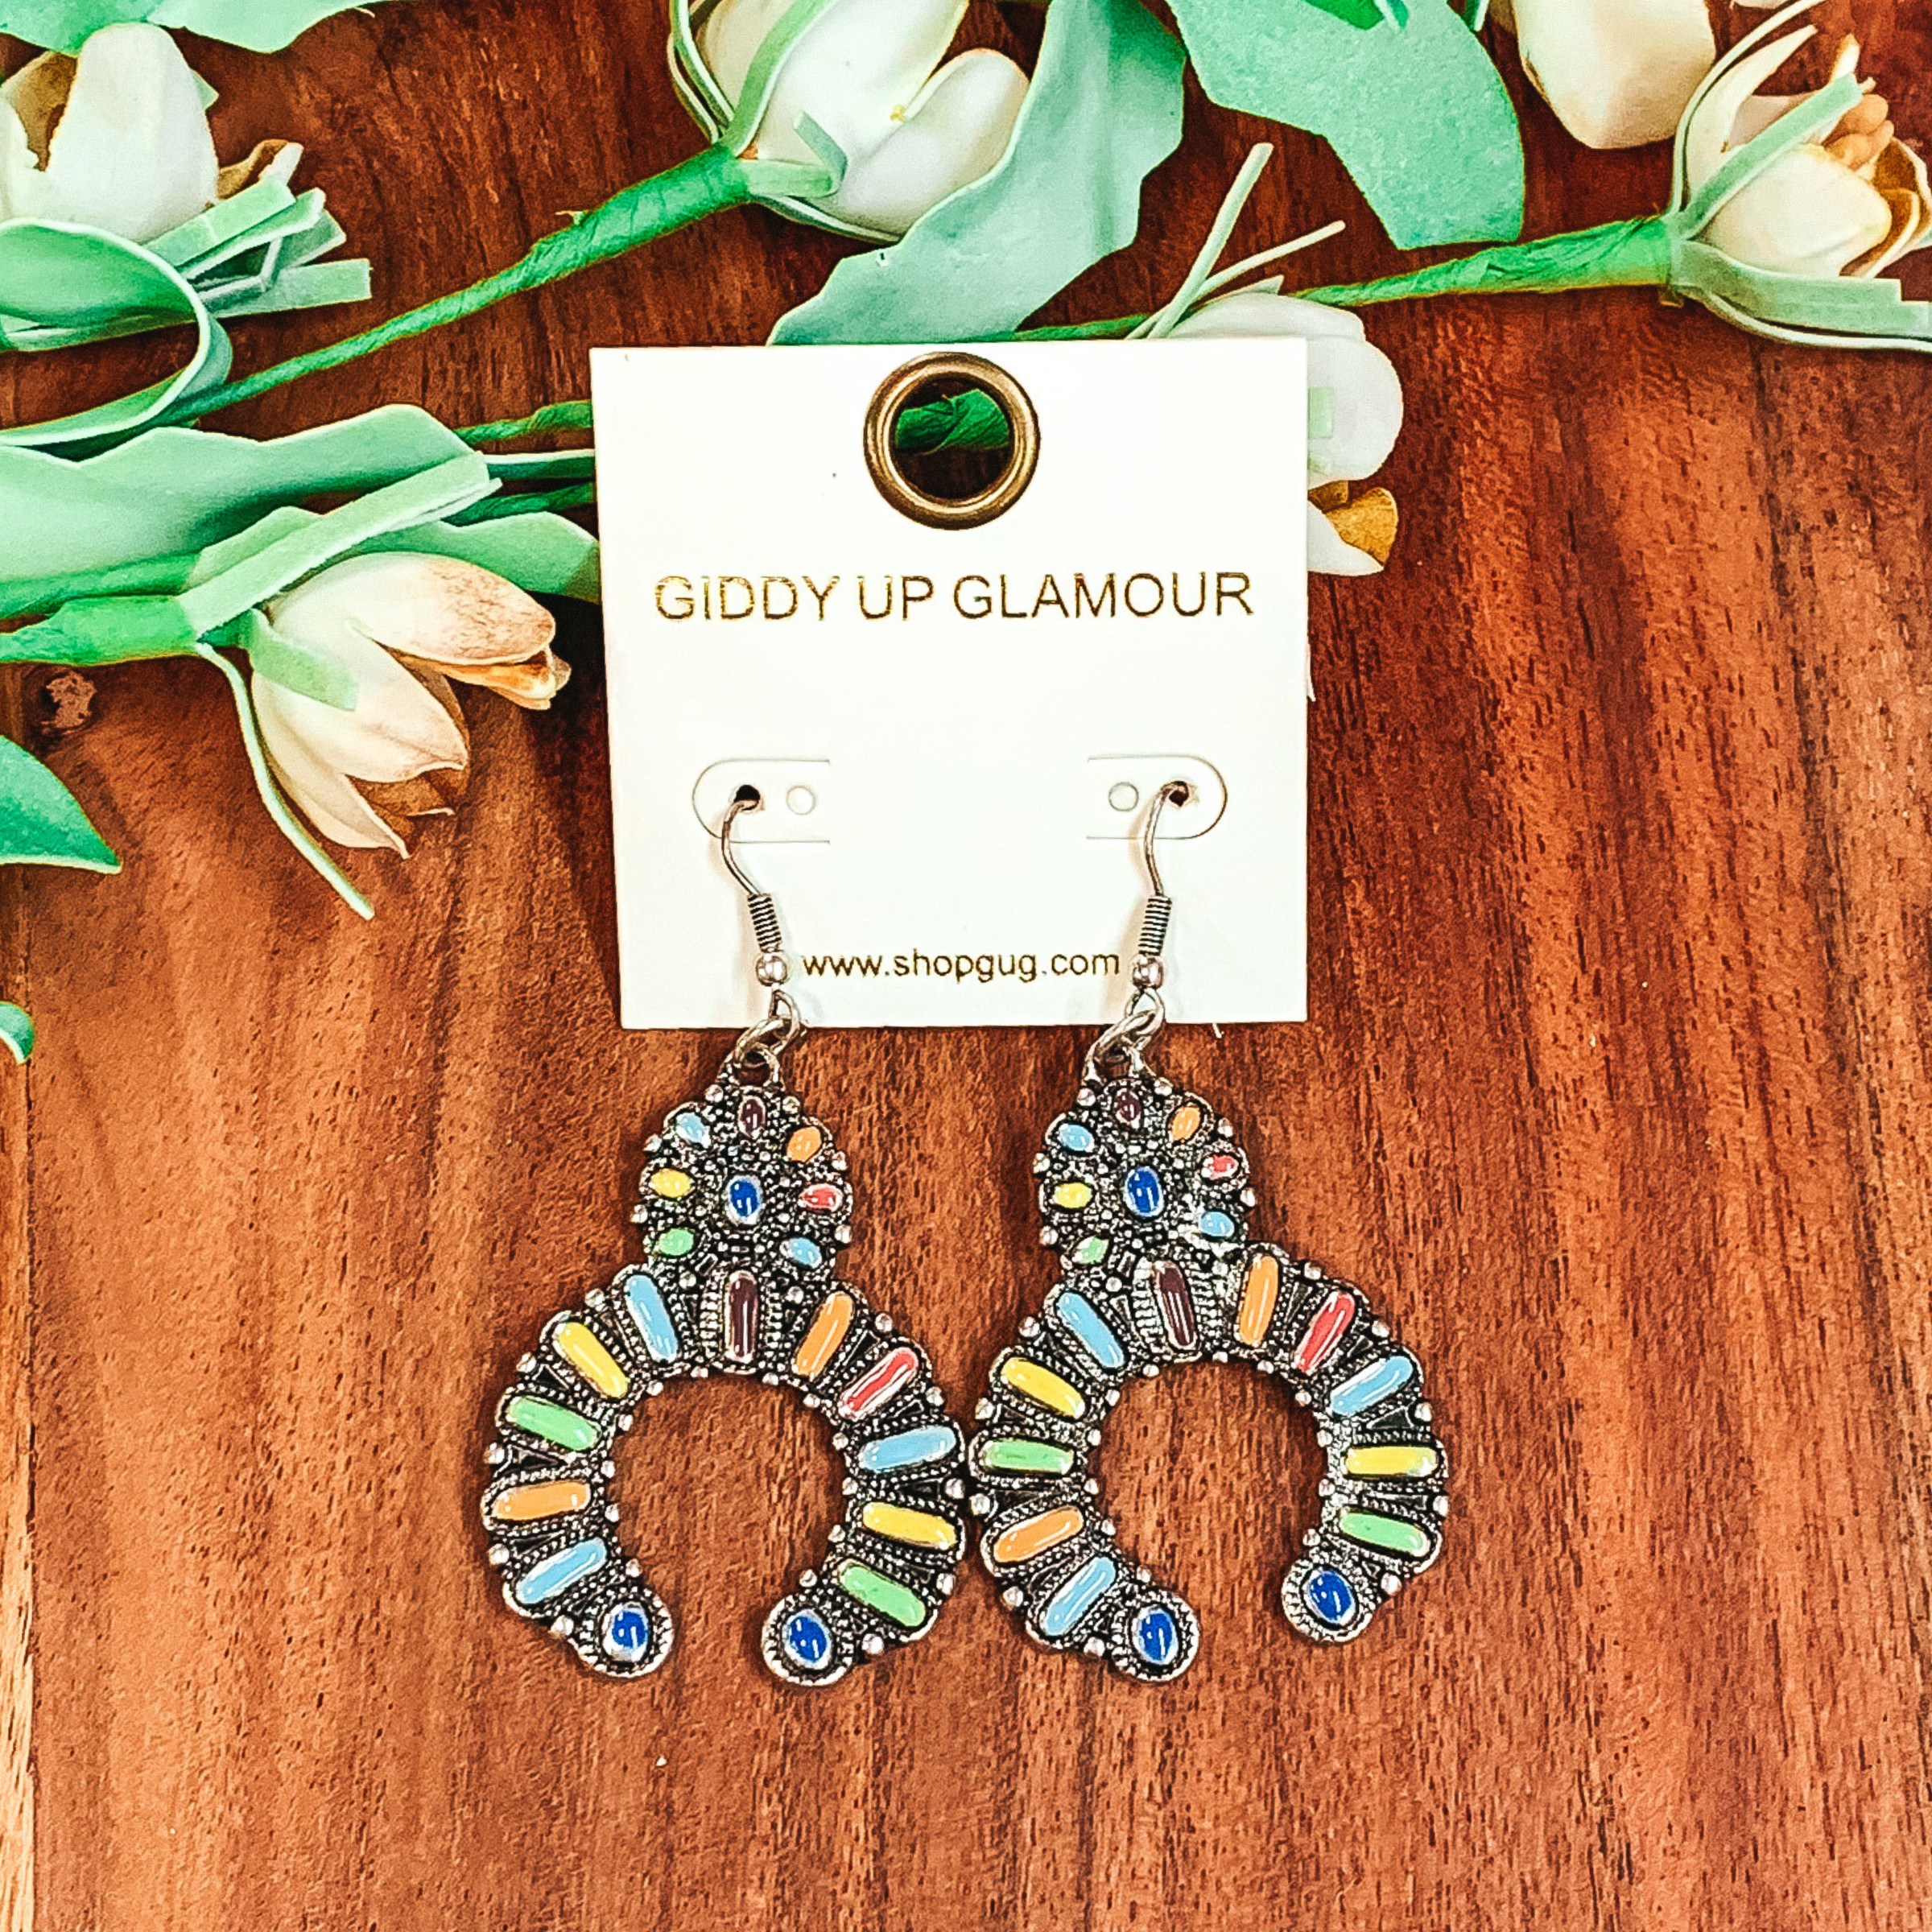 Squash Blossom Dangle Earrings in Multicolored - Giddy Up Glamour Boutique